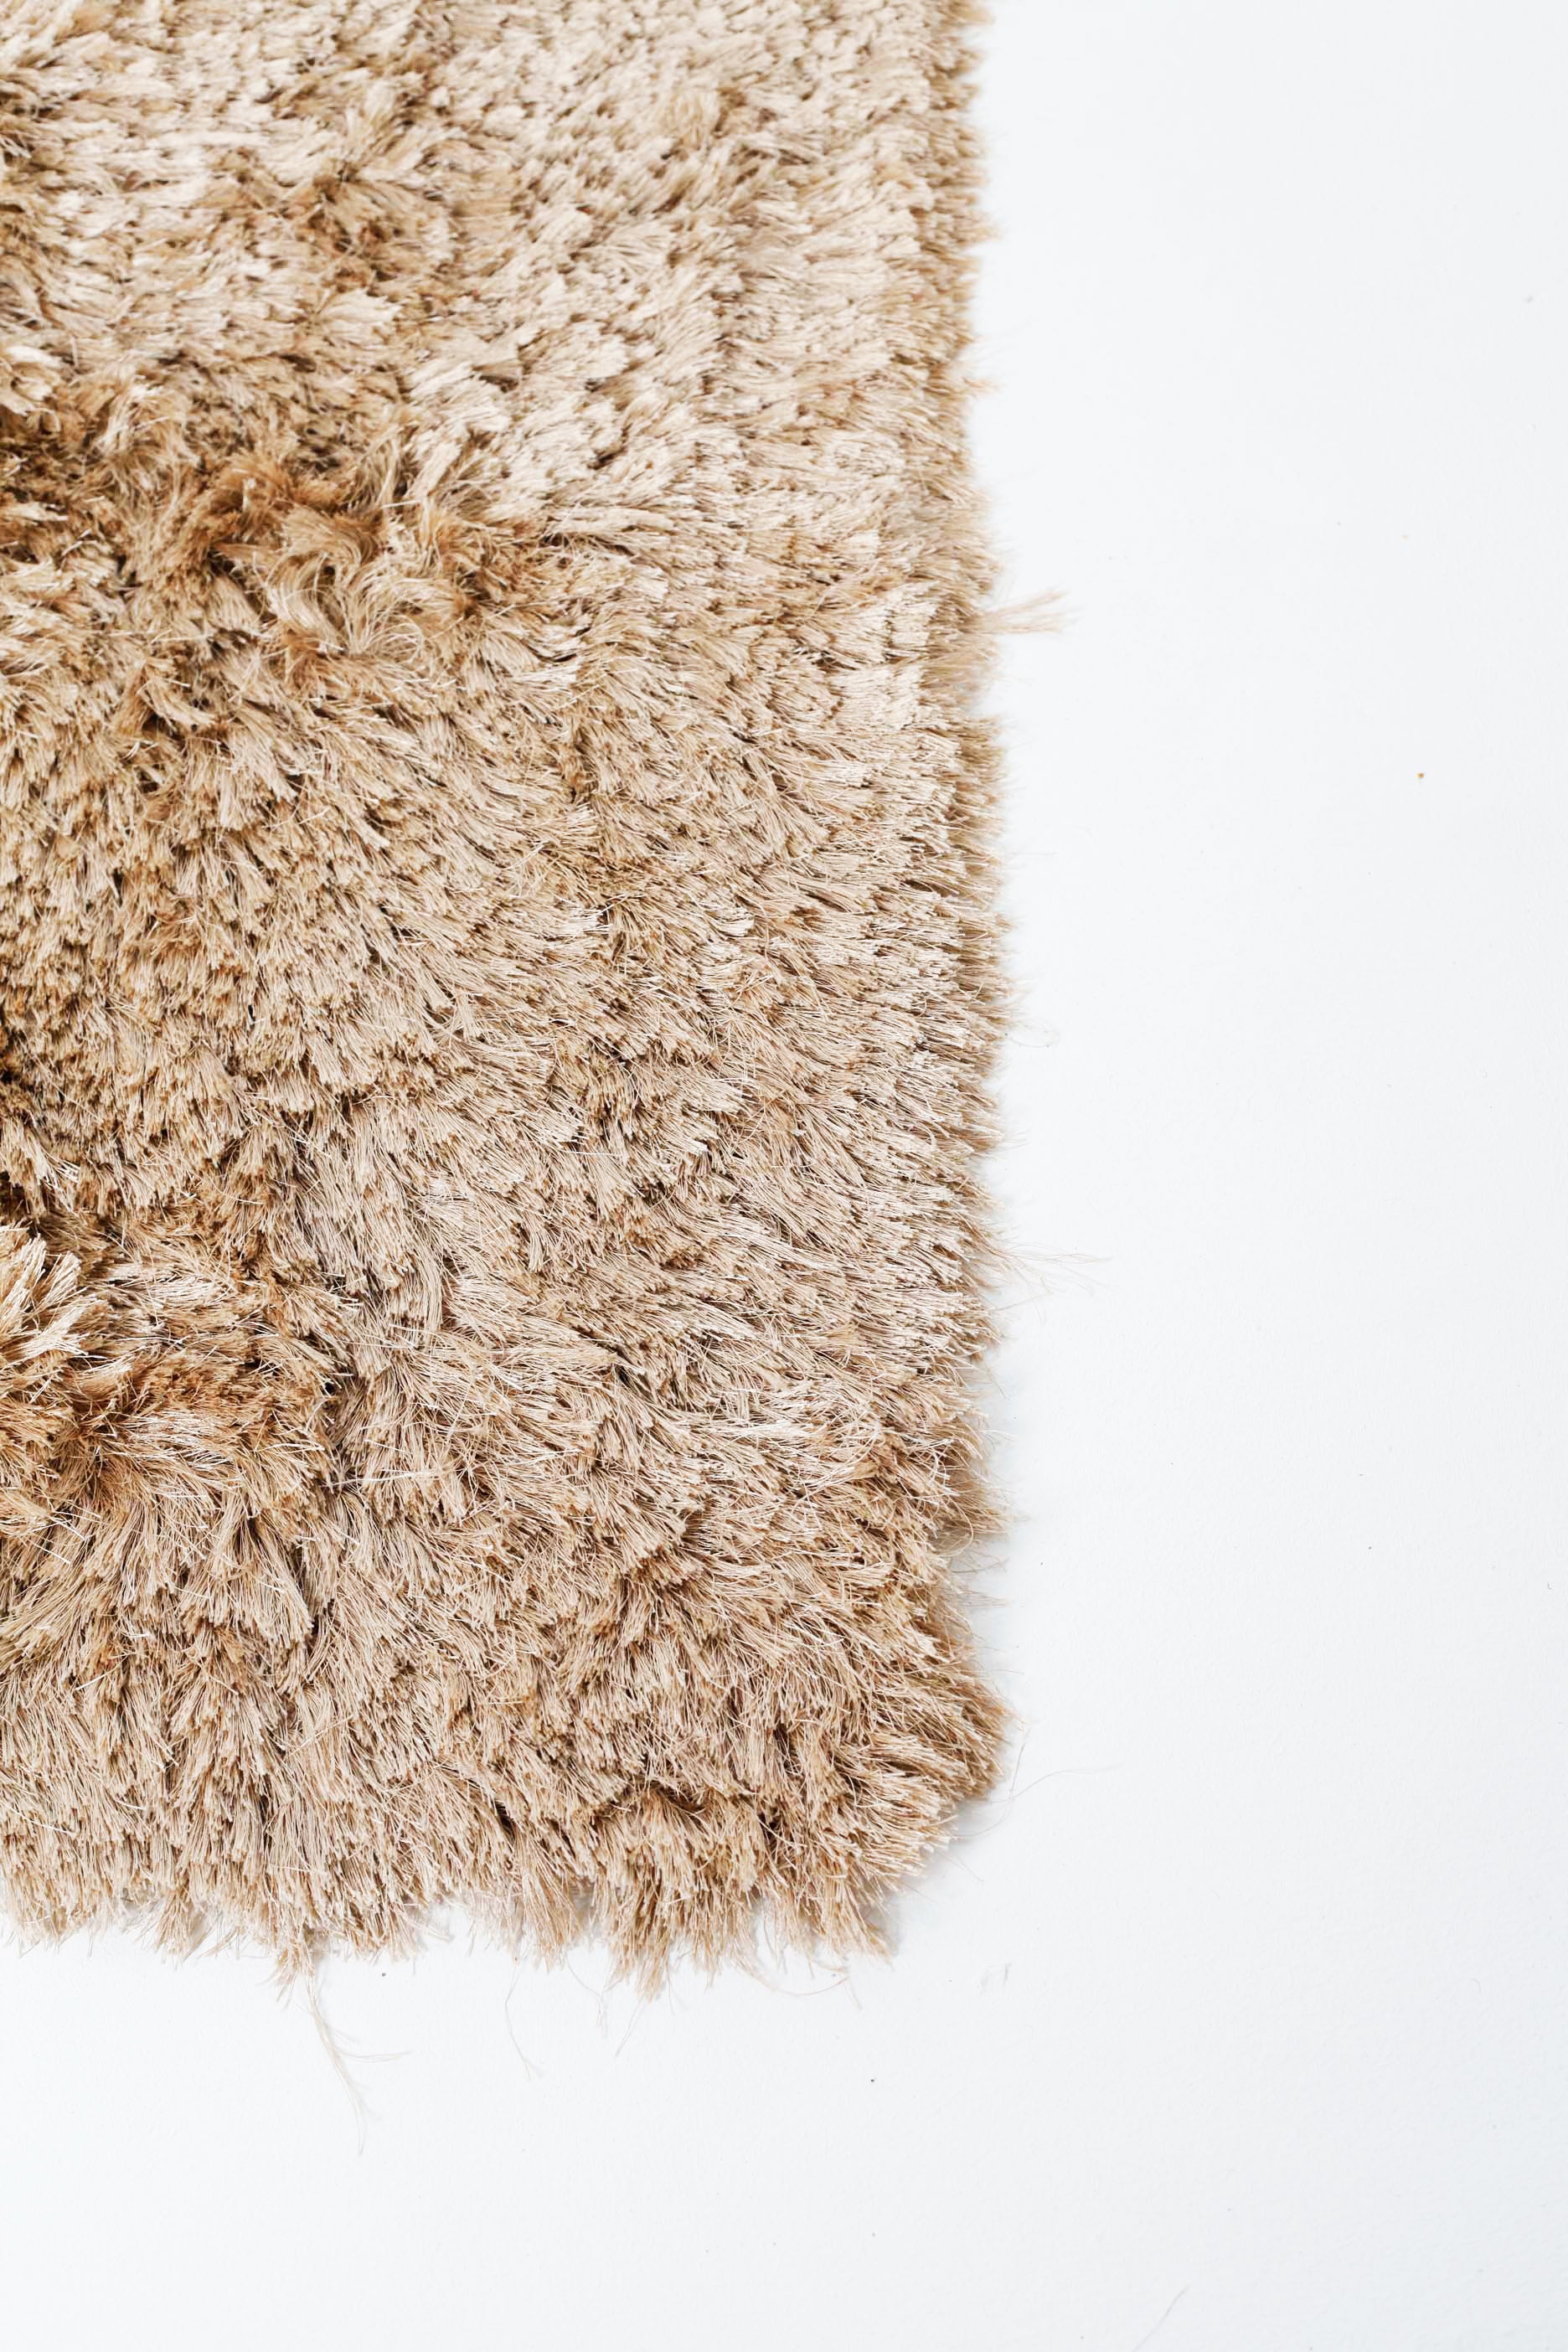 CHAMPAGNE TUFTED SHAGGY RUG